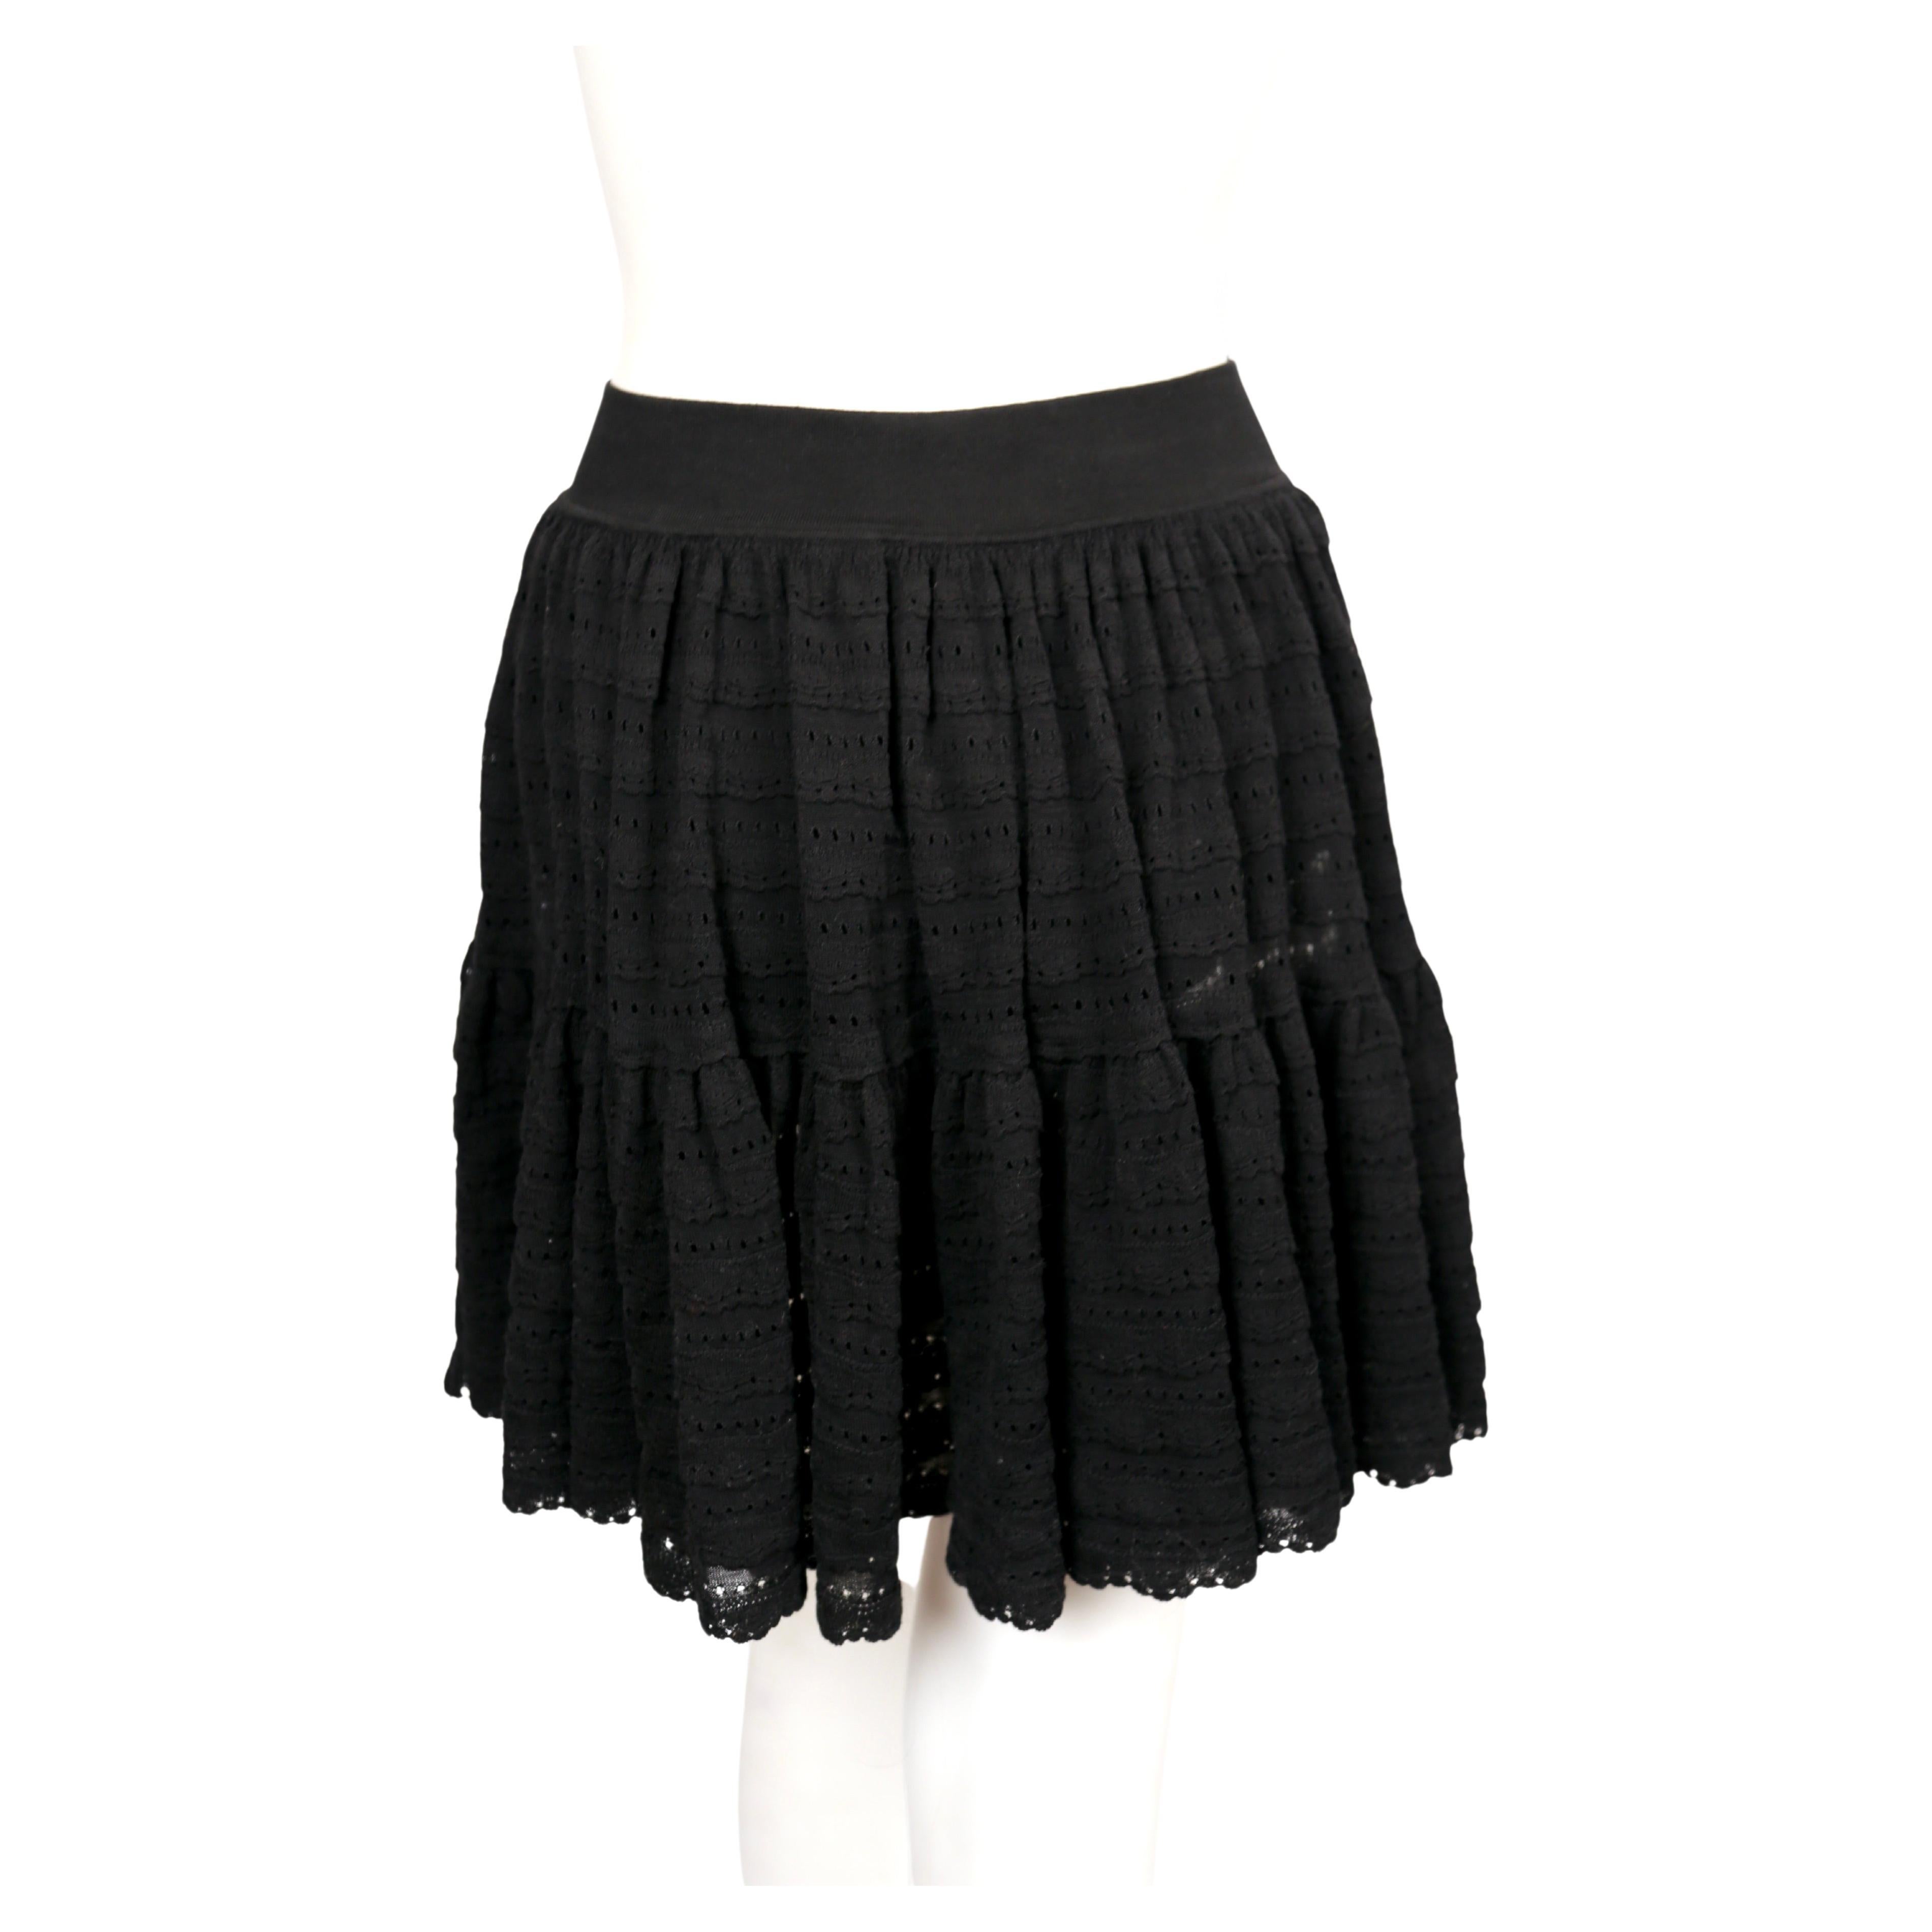 2000's AZZEDINE ALAIA black pointelle knit skirt with ruffles & hidden shorts For Sale 3